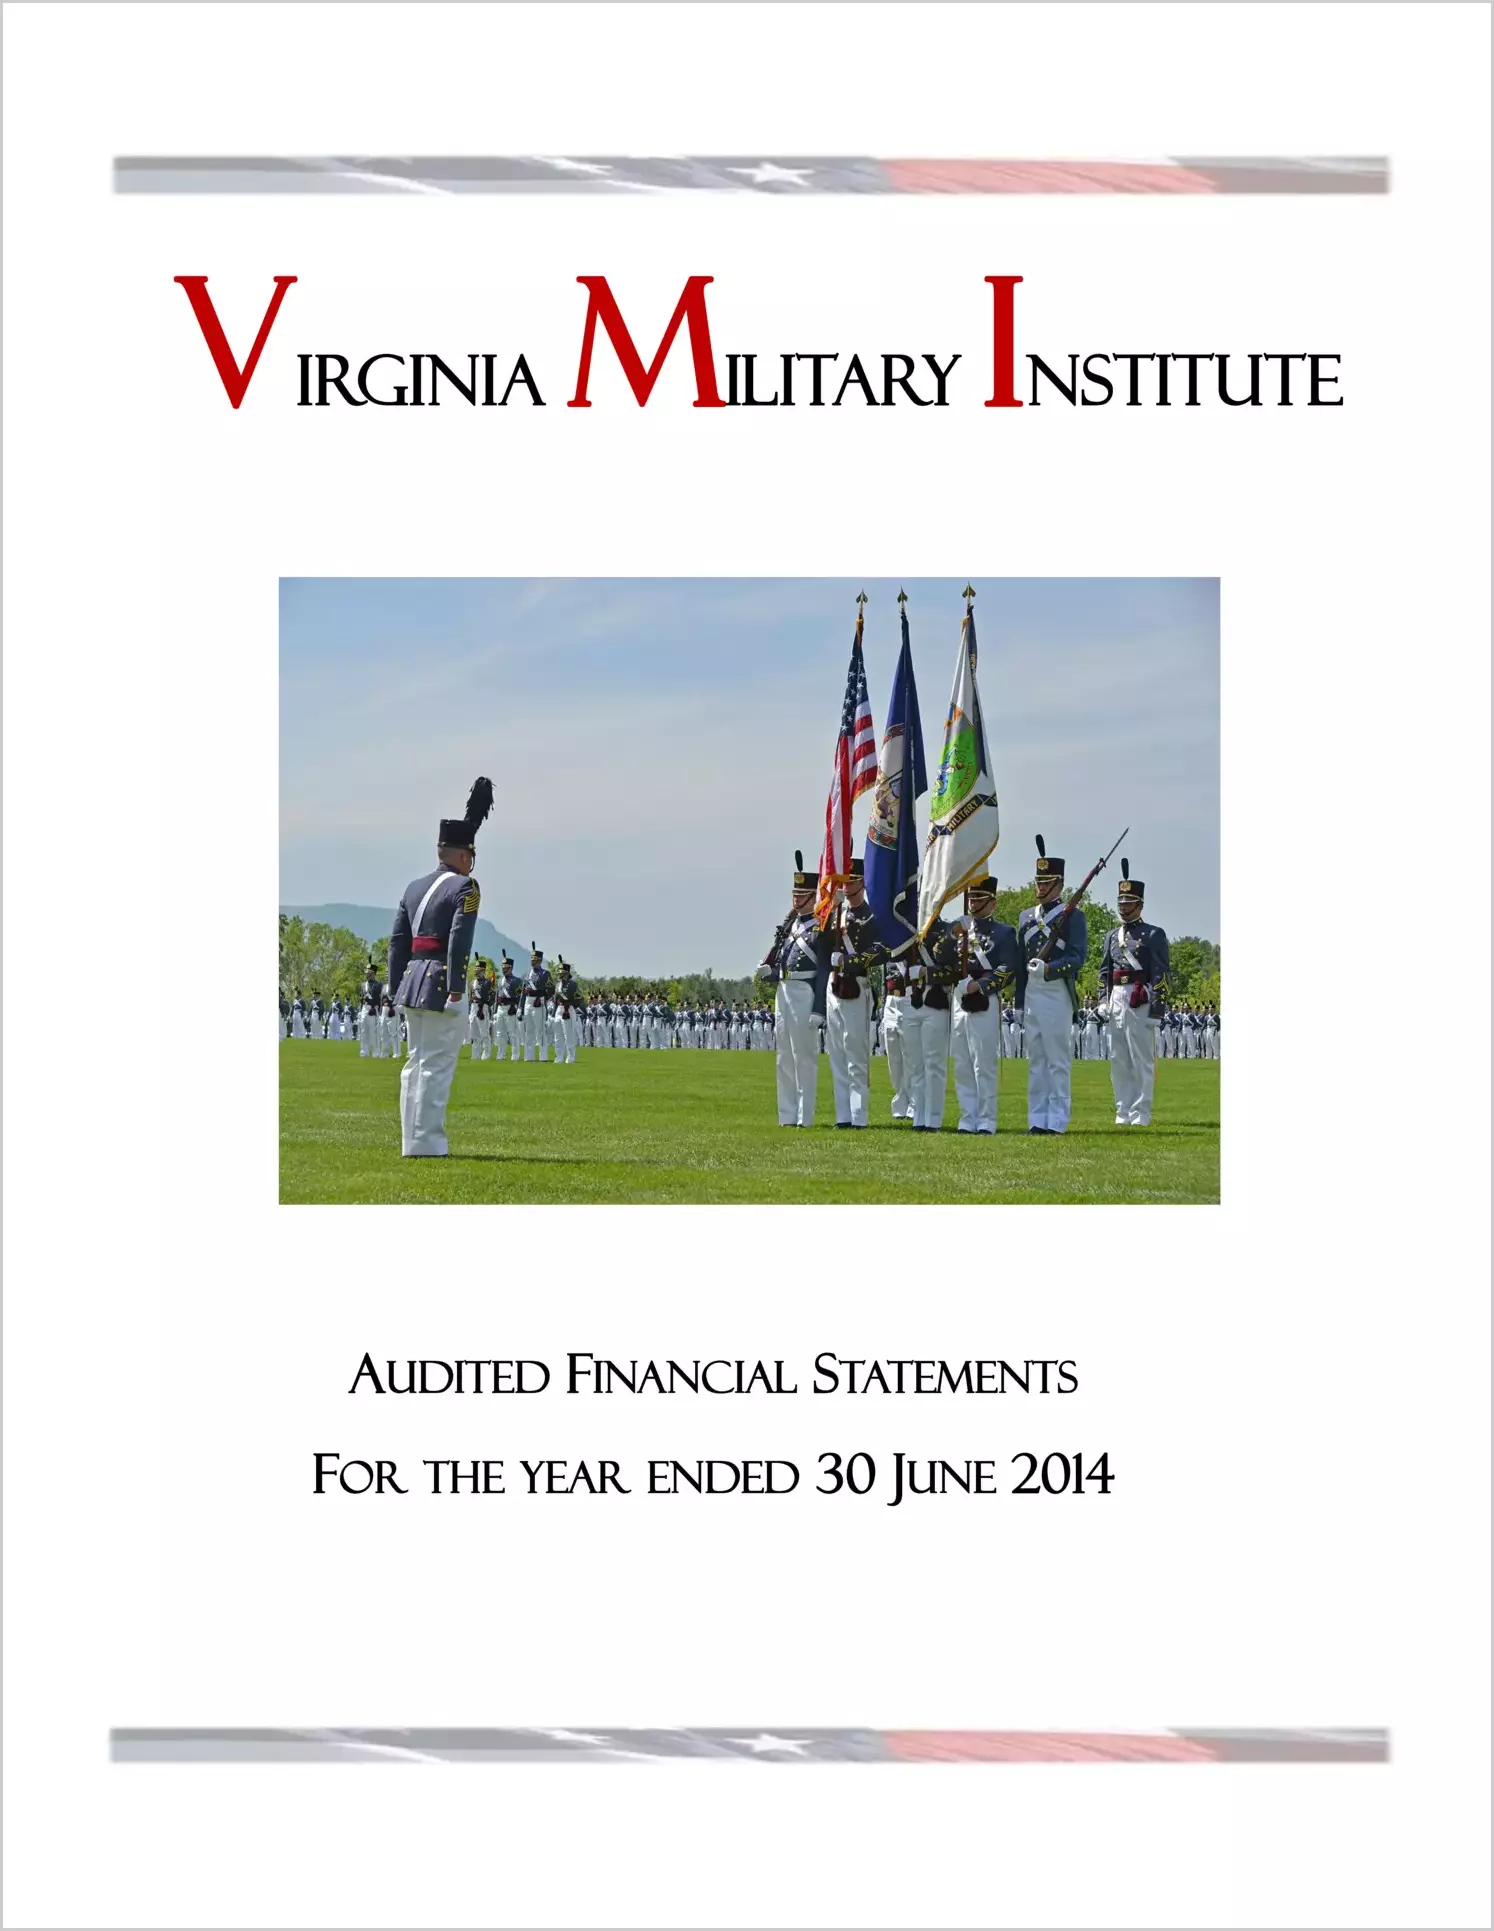 Virginia Military Institute Financial Statements for year ended June 30, 2014